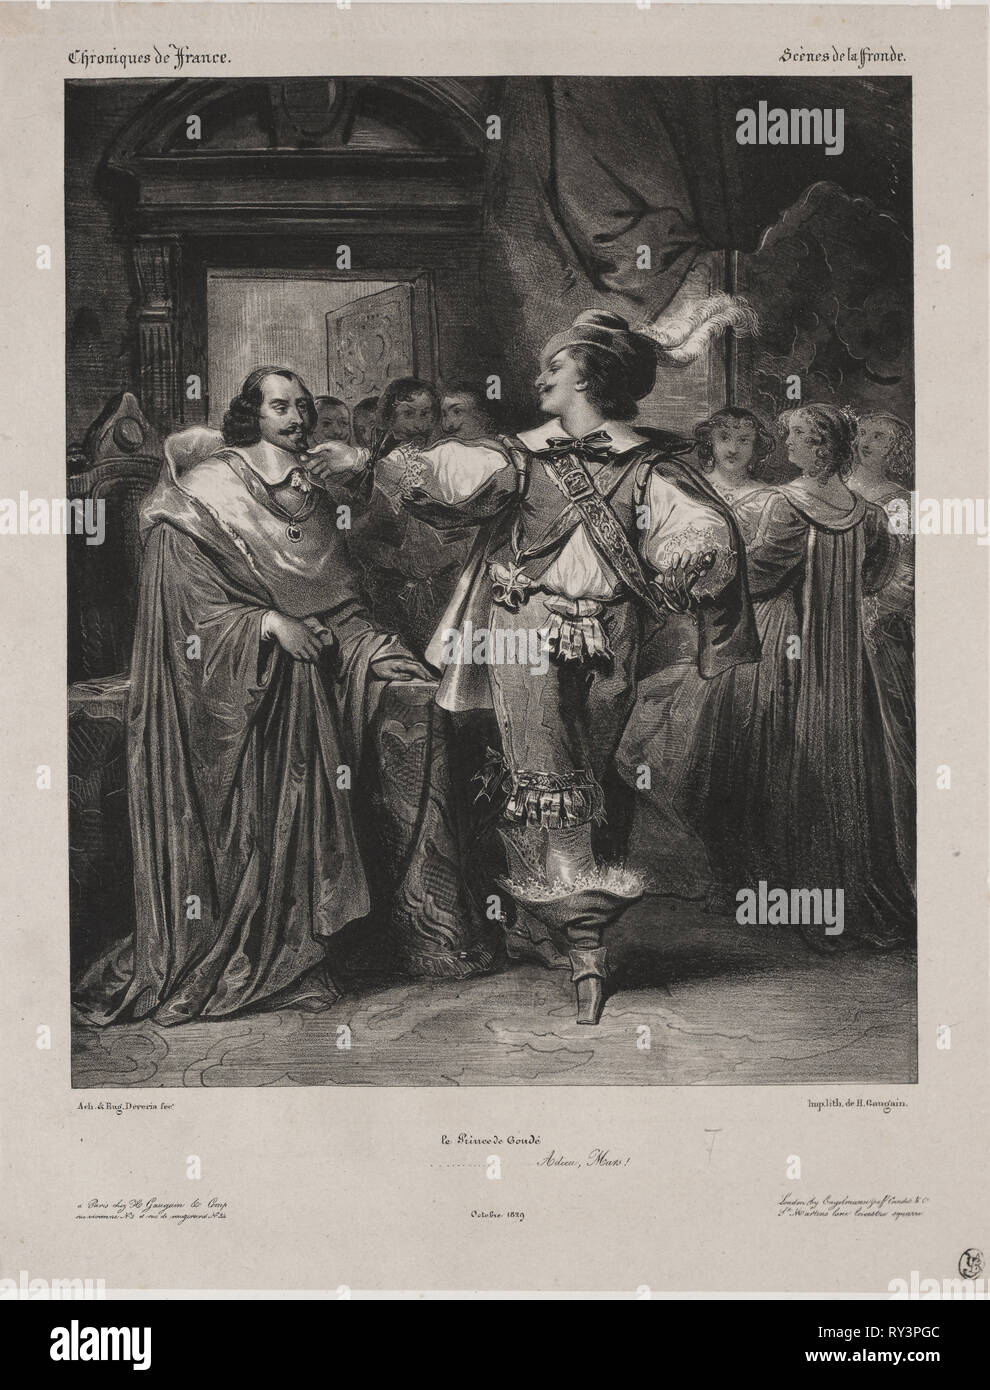 Chronicles of France:  Scene of the Fronde - The Prince of Condé, 1829. Eugène François Marie Joseph Devéria (French, 1805-1865), and Achille Devéria (French, 1800-1857). Lithograph Stock Photo